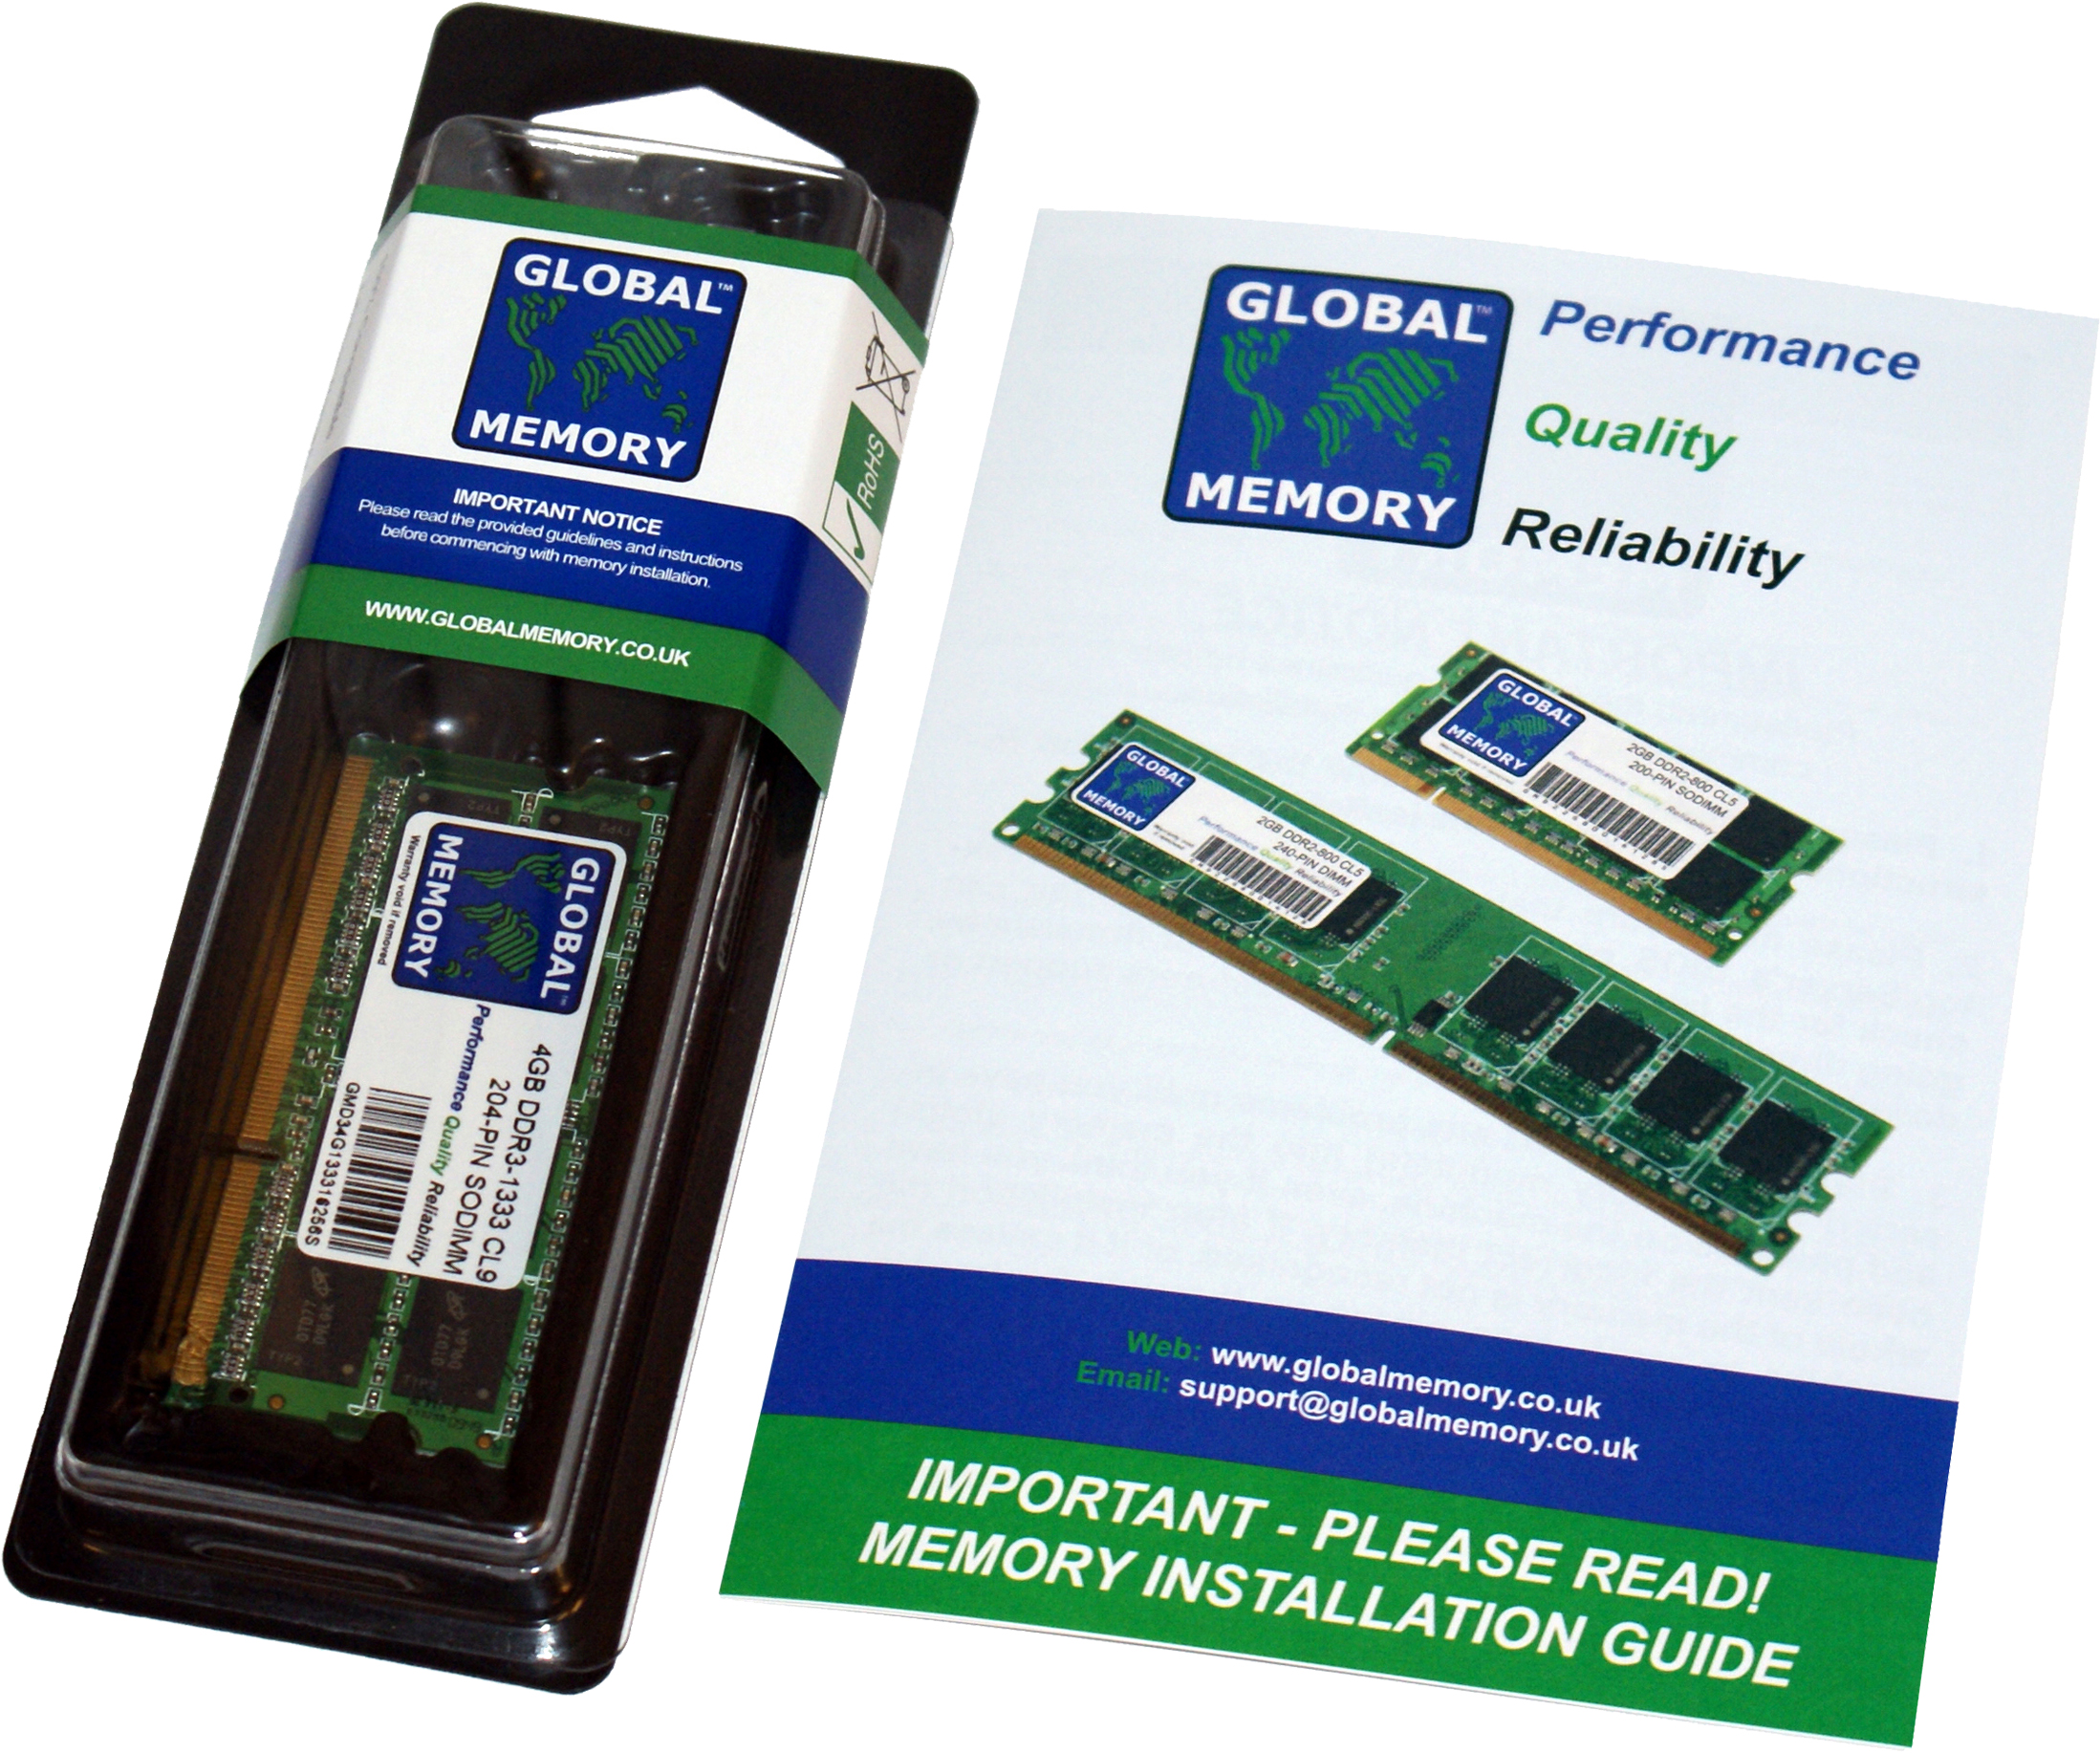 8GB DDR3 1866MHz PC3-14900 204-PIN SODIMM MEMORY RAM FOR ADVENT LAPTOPS/NOTEBOOKS